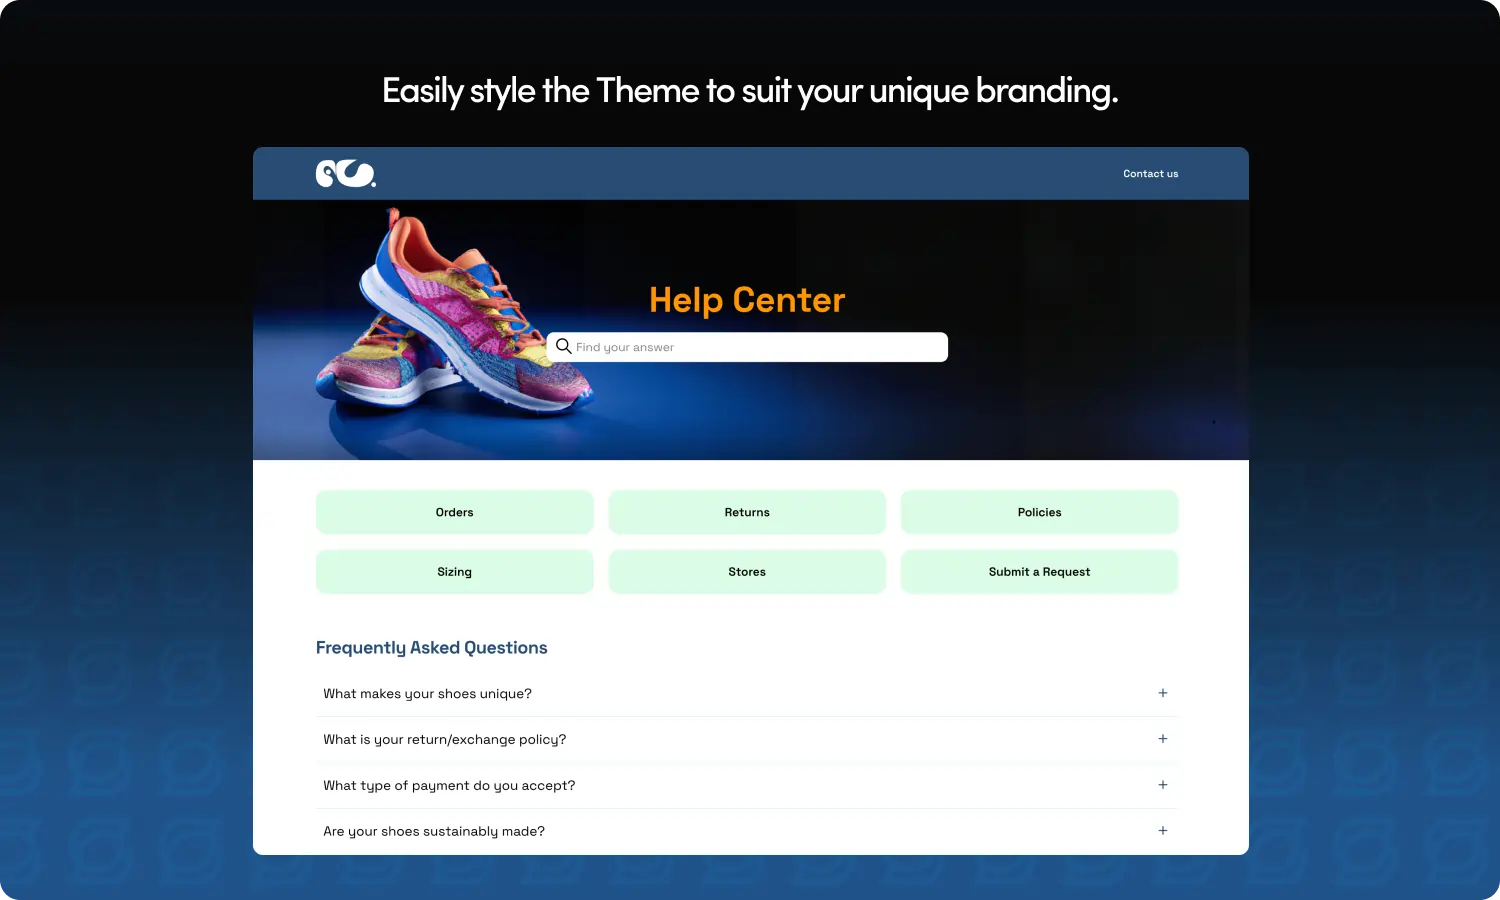 an example of an alternative version of the theme with brighter colours